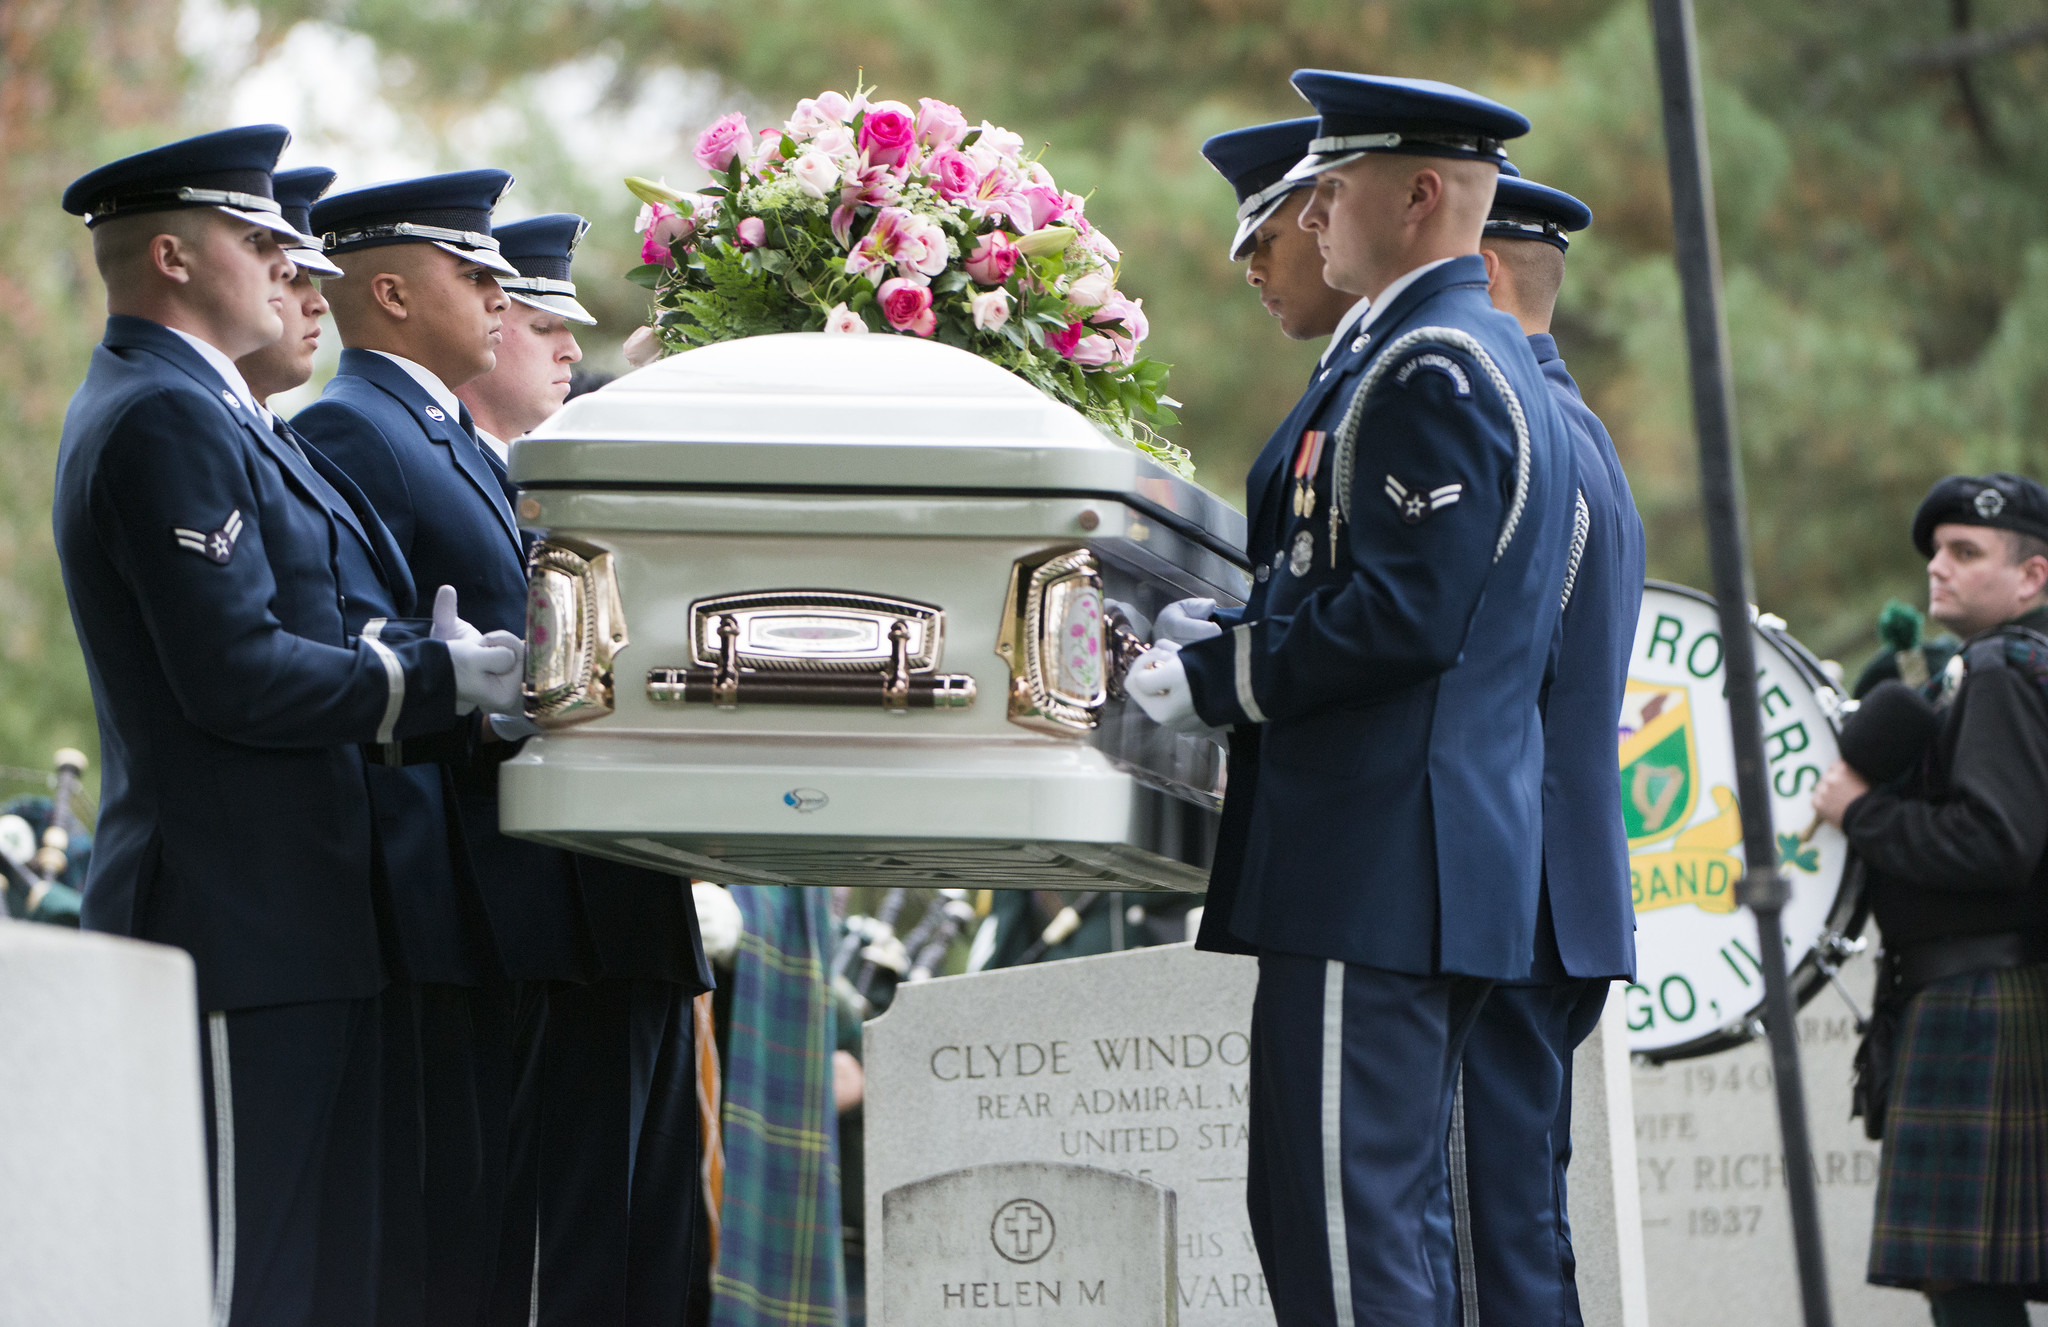 A military casket team at the funeral of the wife of an Air Force officer